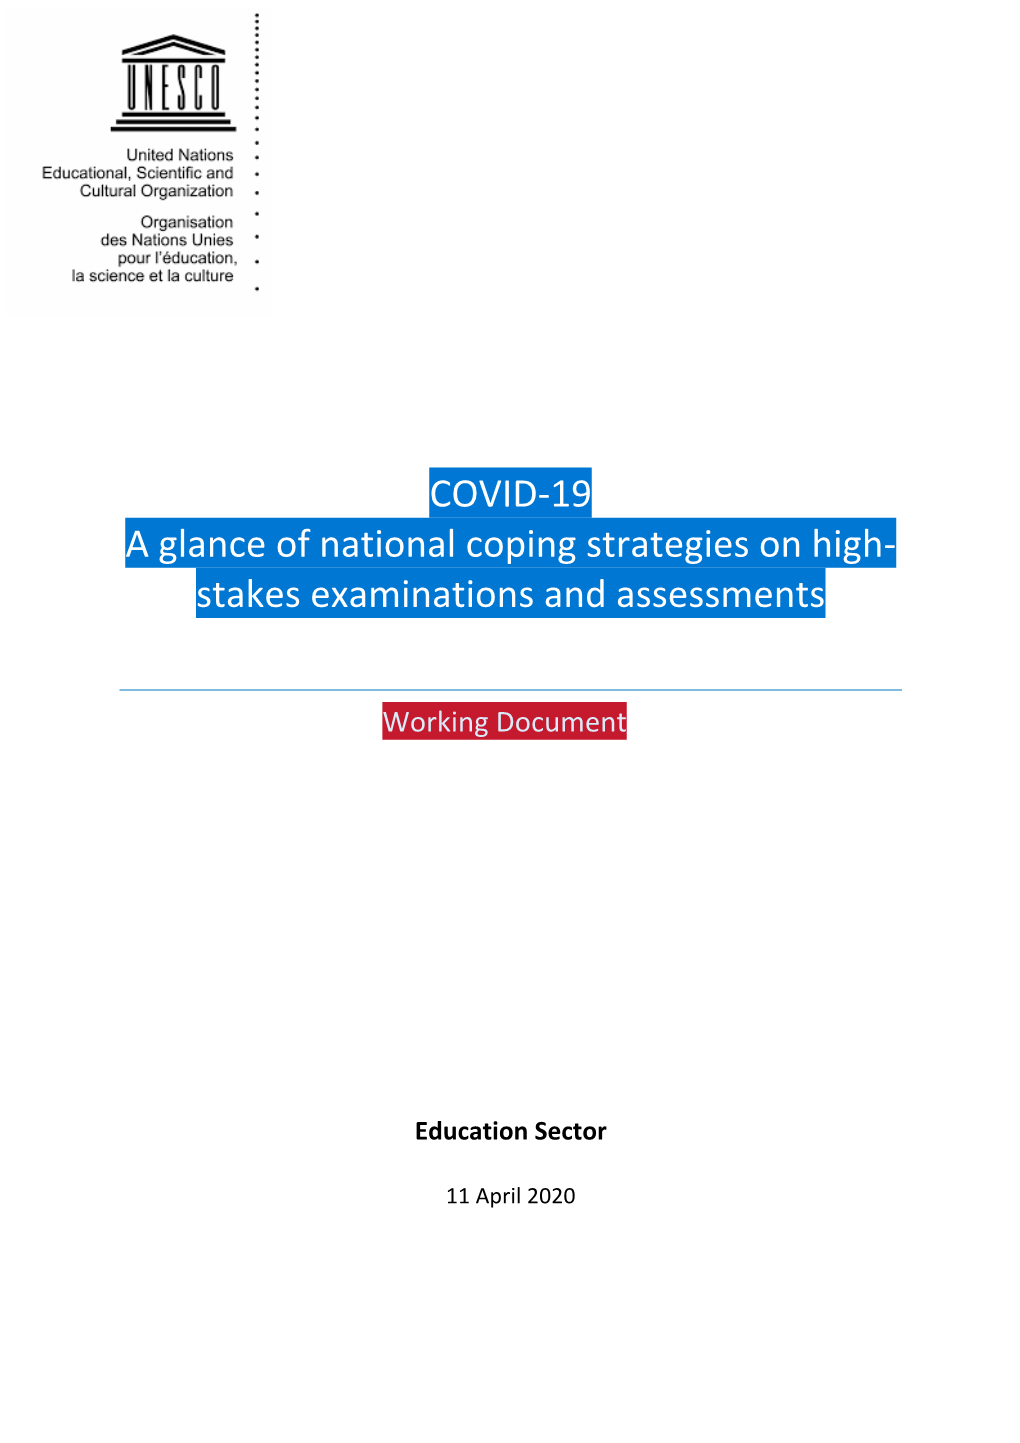 COVID-19 a Glance of National Coping Strategies on High- Stakes Examinations and Assessments